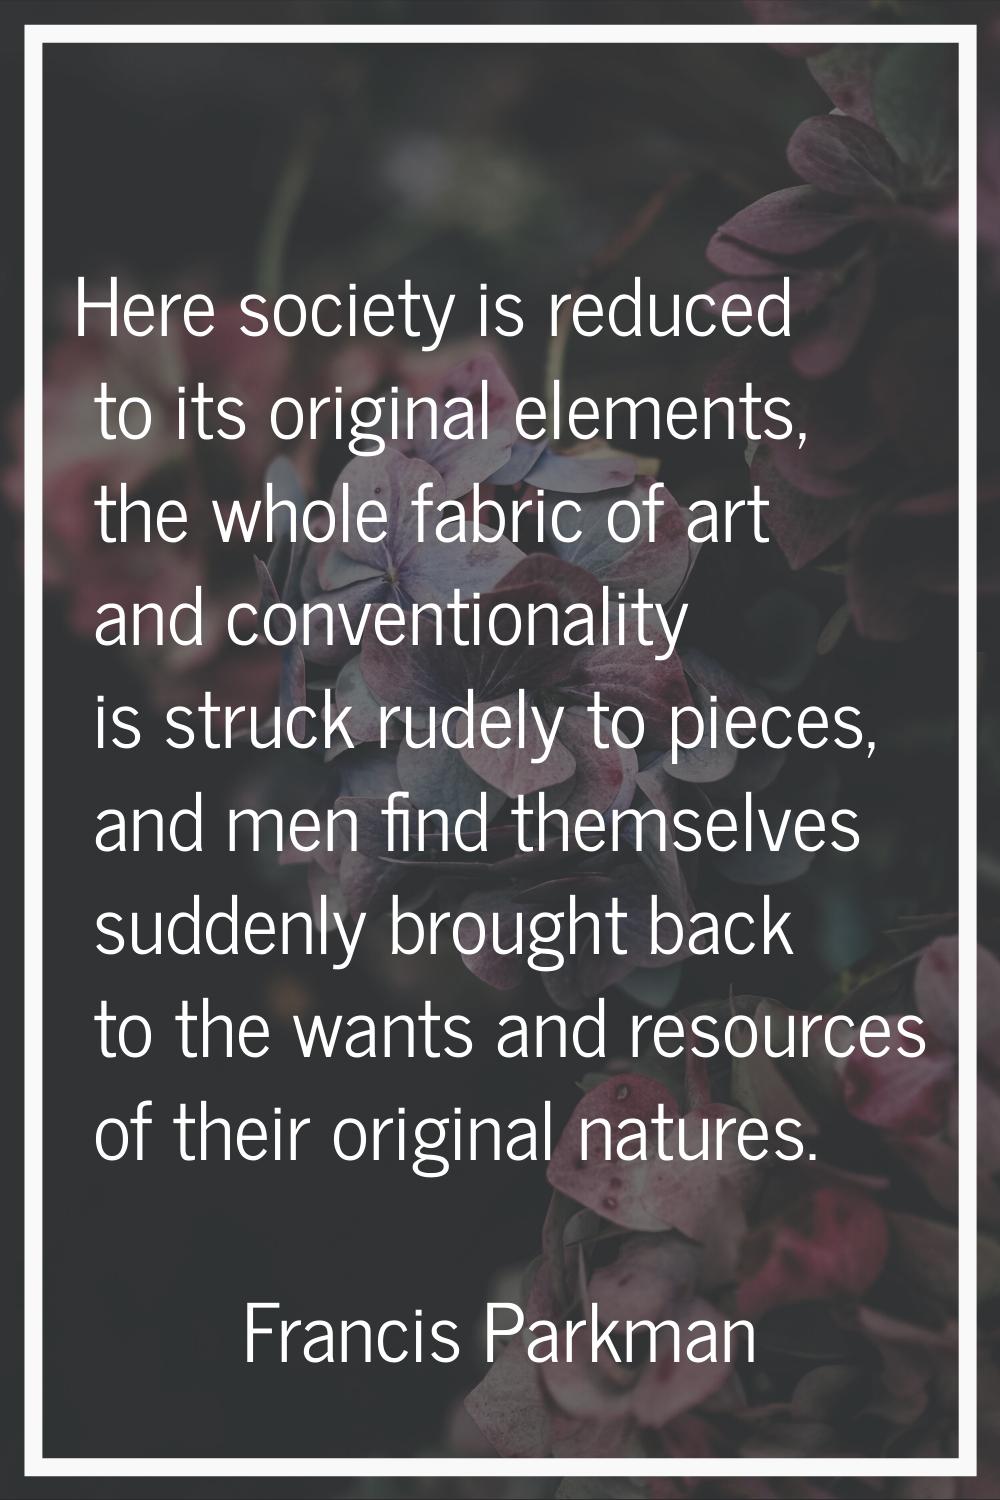 Here society is reduced to its original elements, the whole fabric of art and conventionality is st